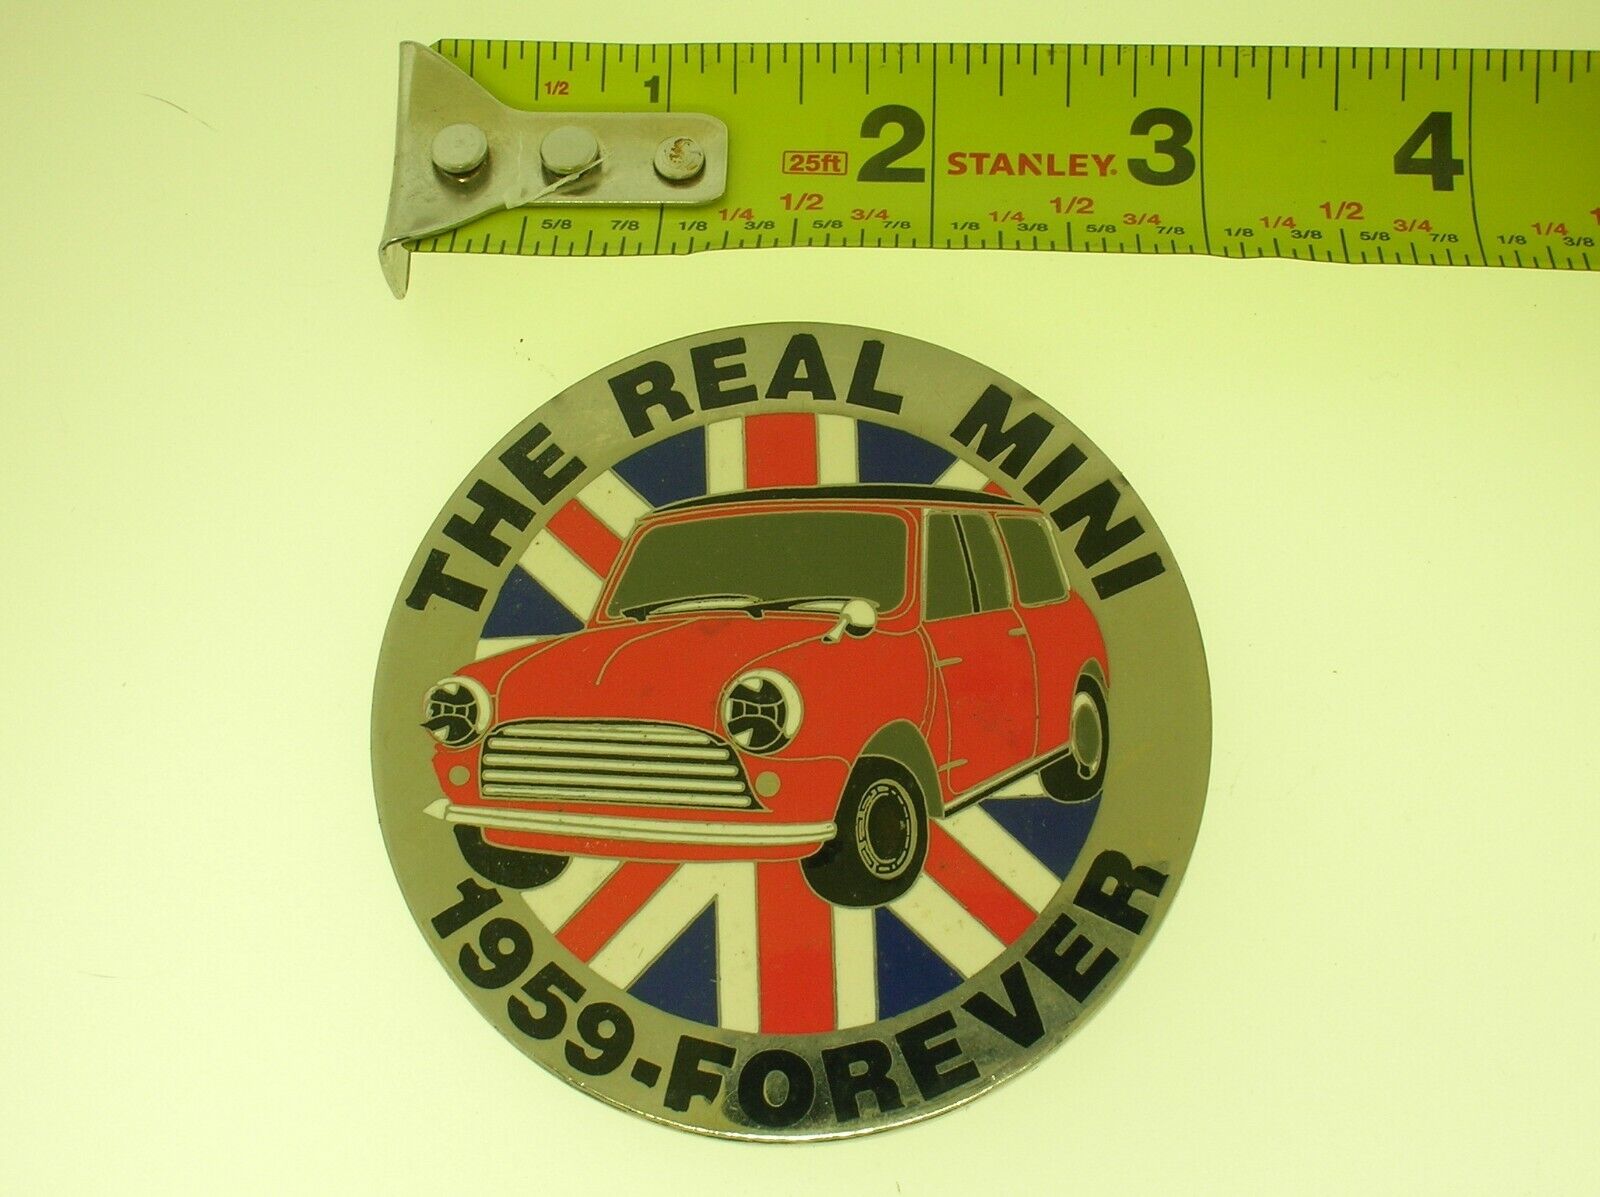 THE REAL MINI 1959 FOREVER VINTAGE GRILLE BADGE - PART OF COLLECTION - 27 OF 46